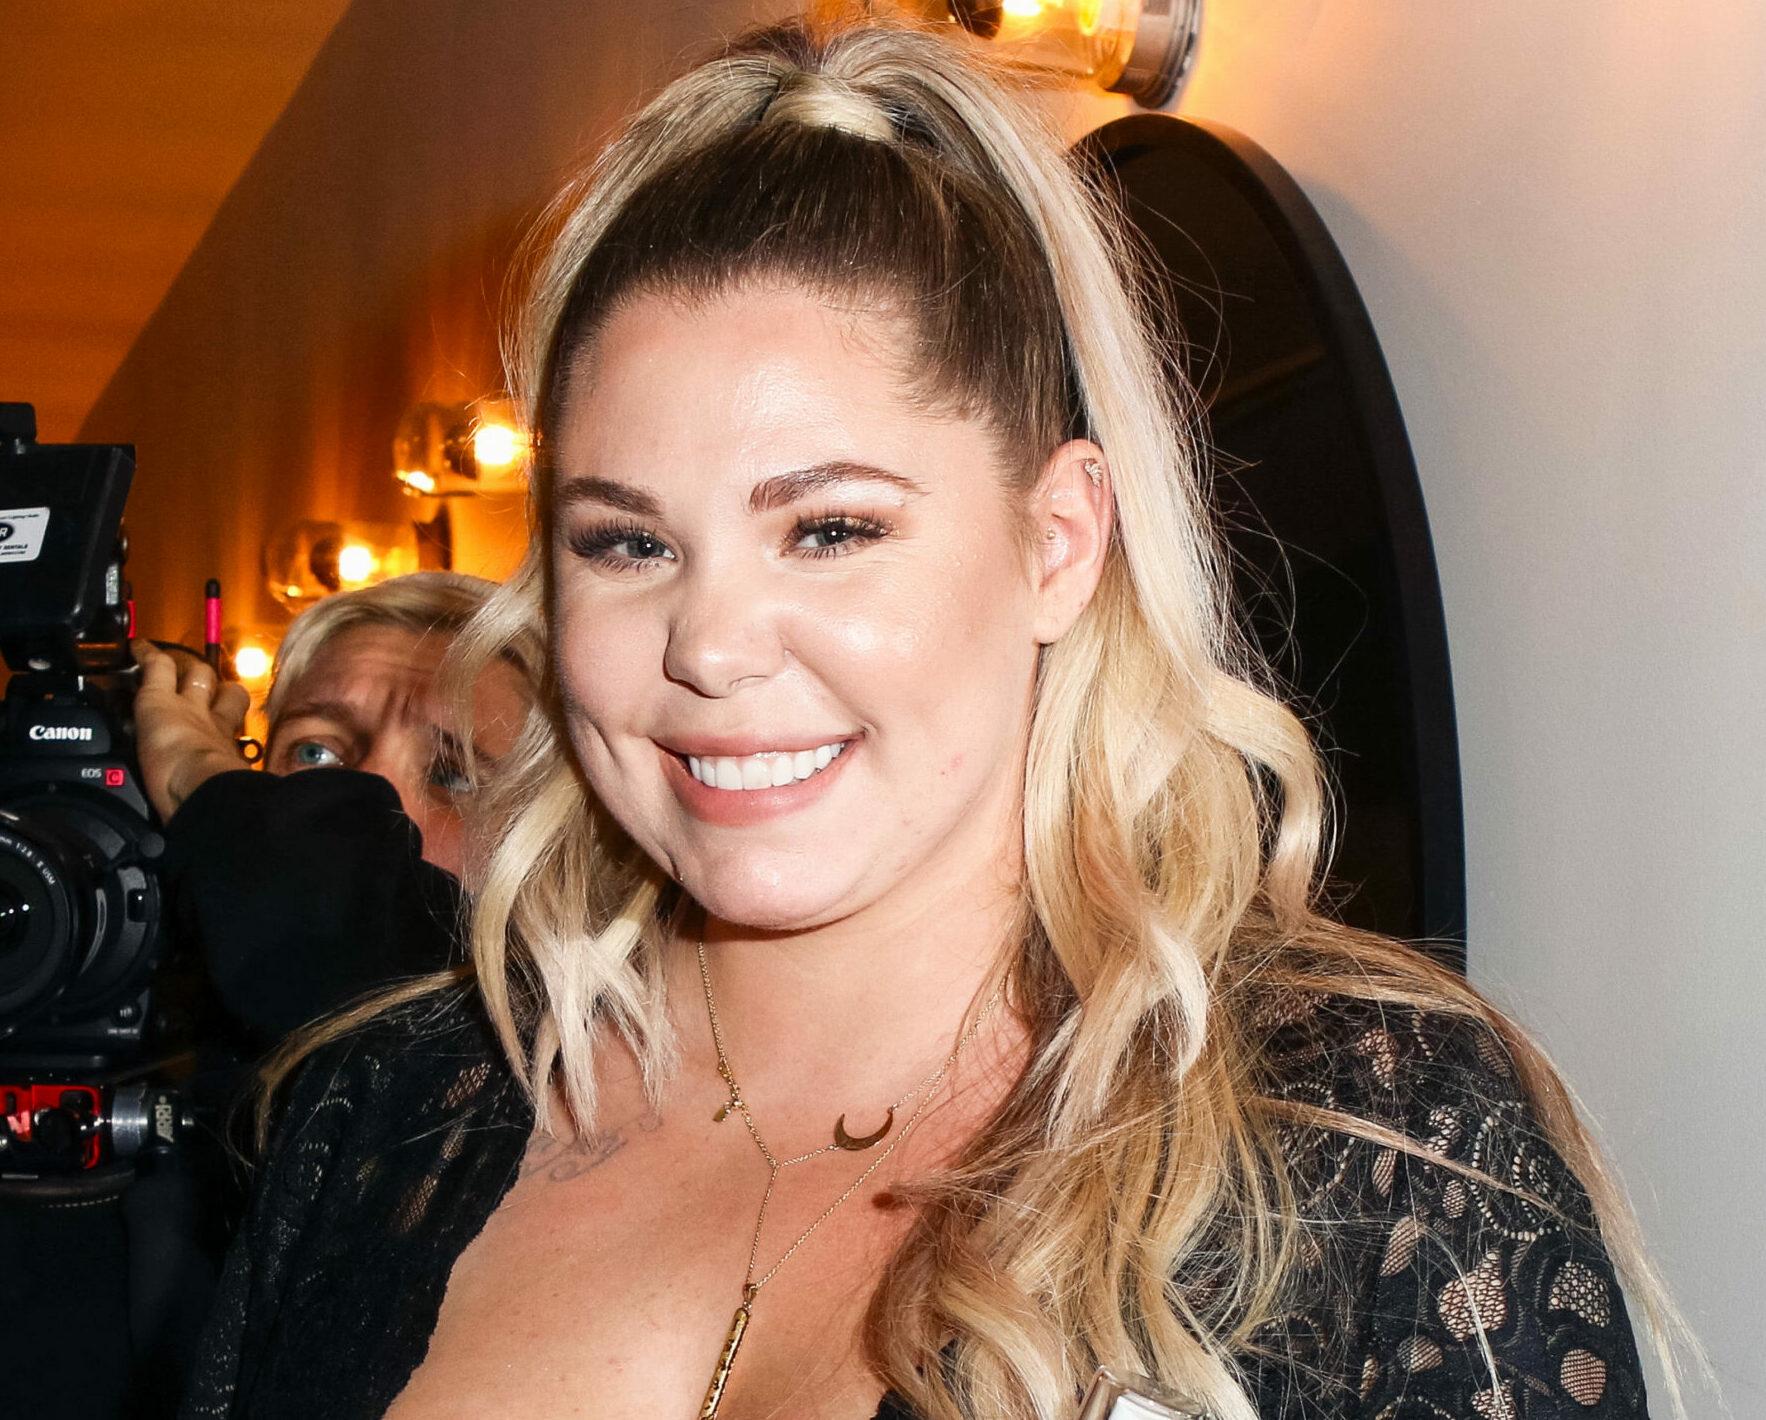 Kailyn Lowry is seen attending PotHead hair product Launch Event in New York City.